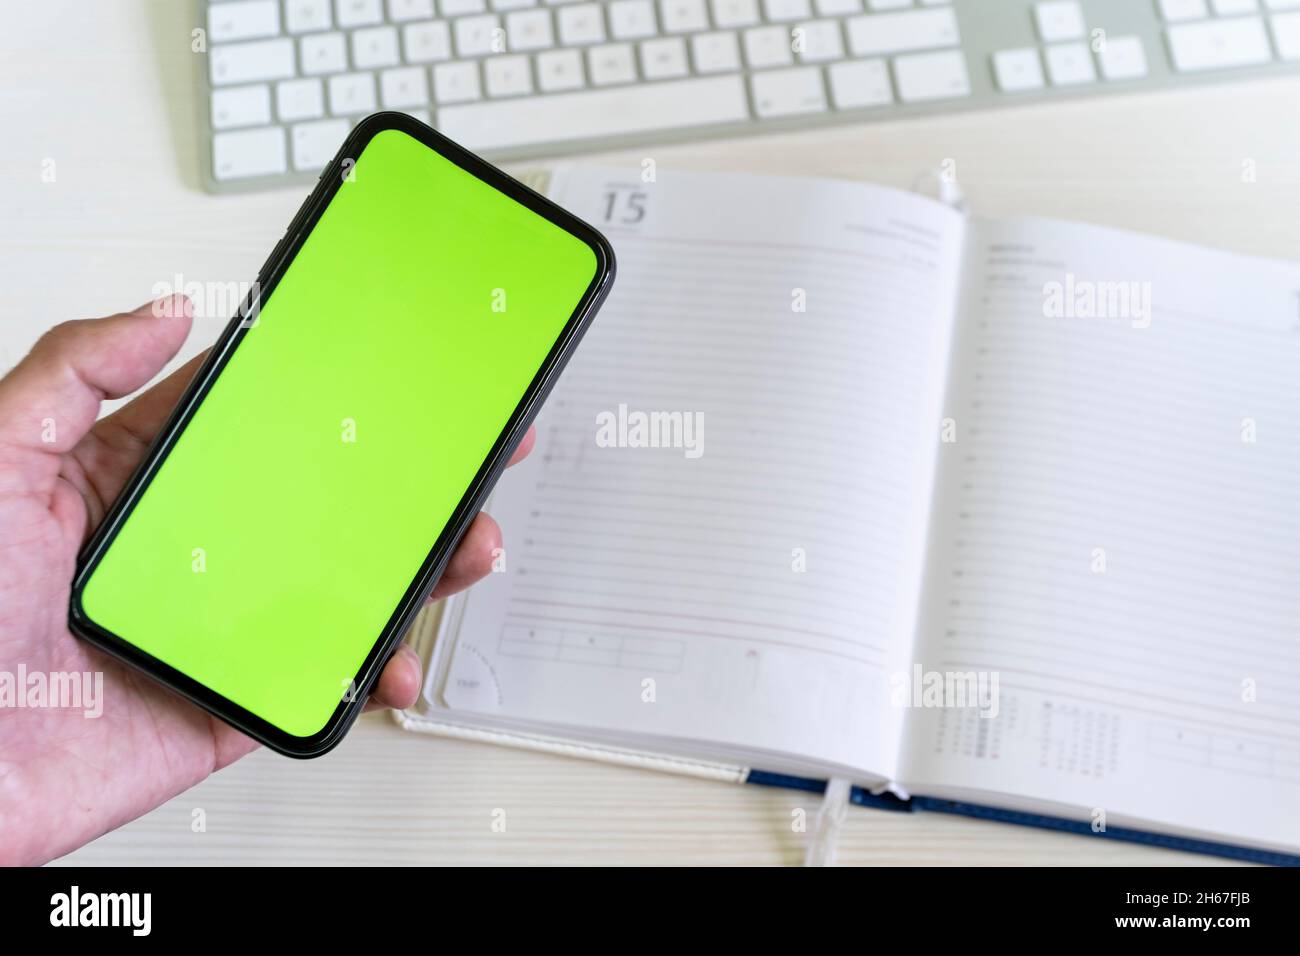 A smartphone with a green screen in a man's hand against the background of a business notepad and a computer keyboard. Stock Photo